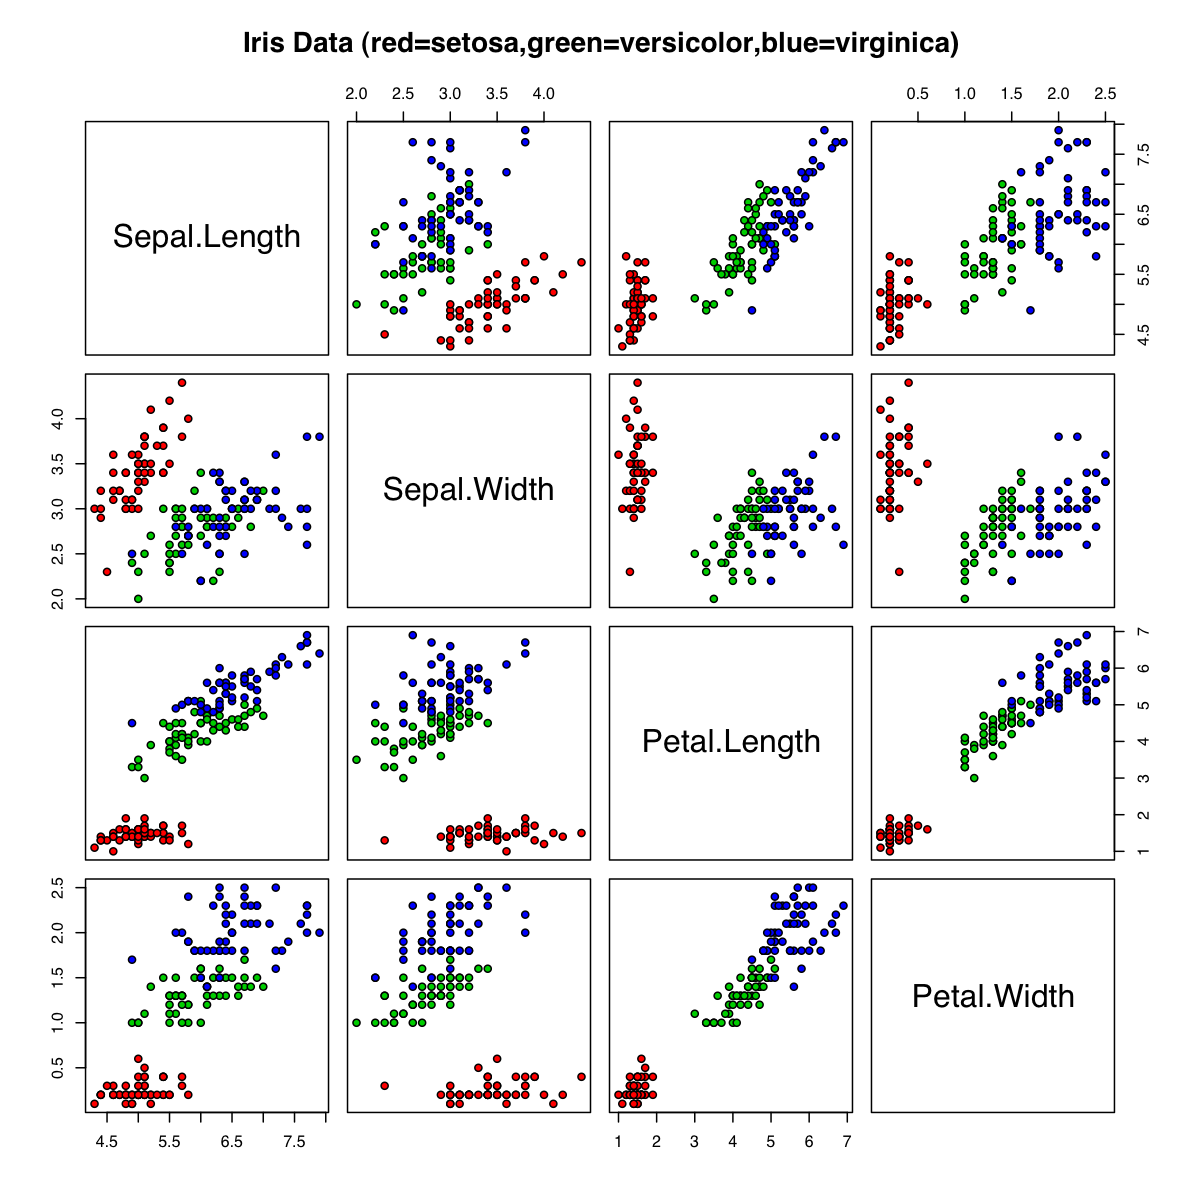 The iris dataset, as a grid of scatterplots